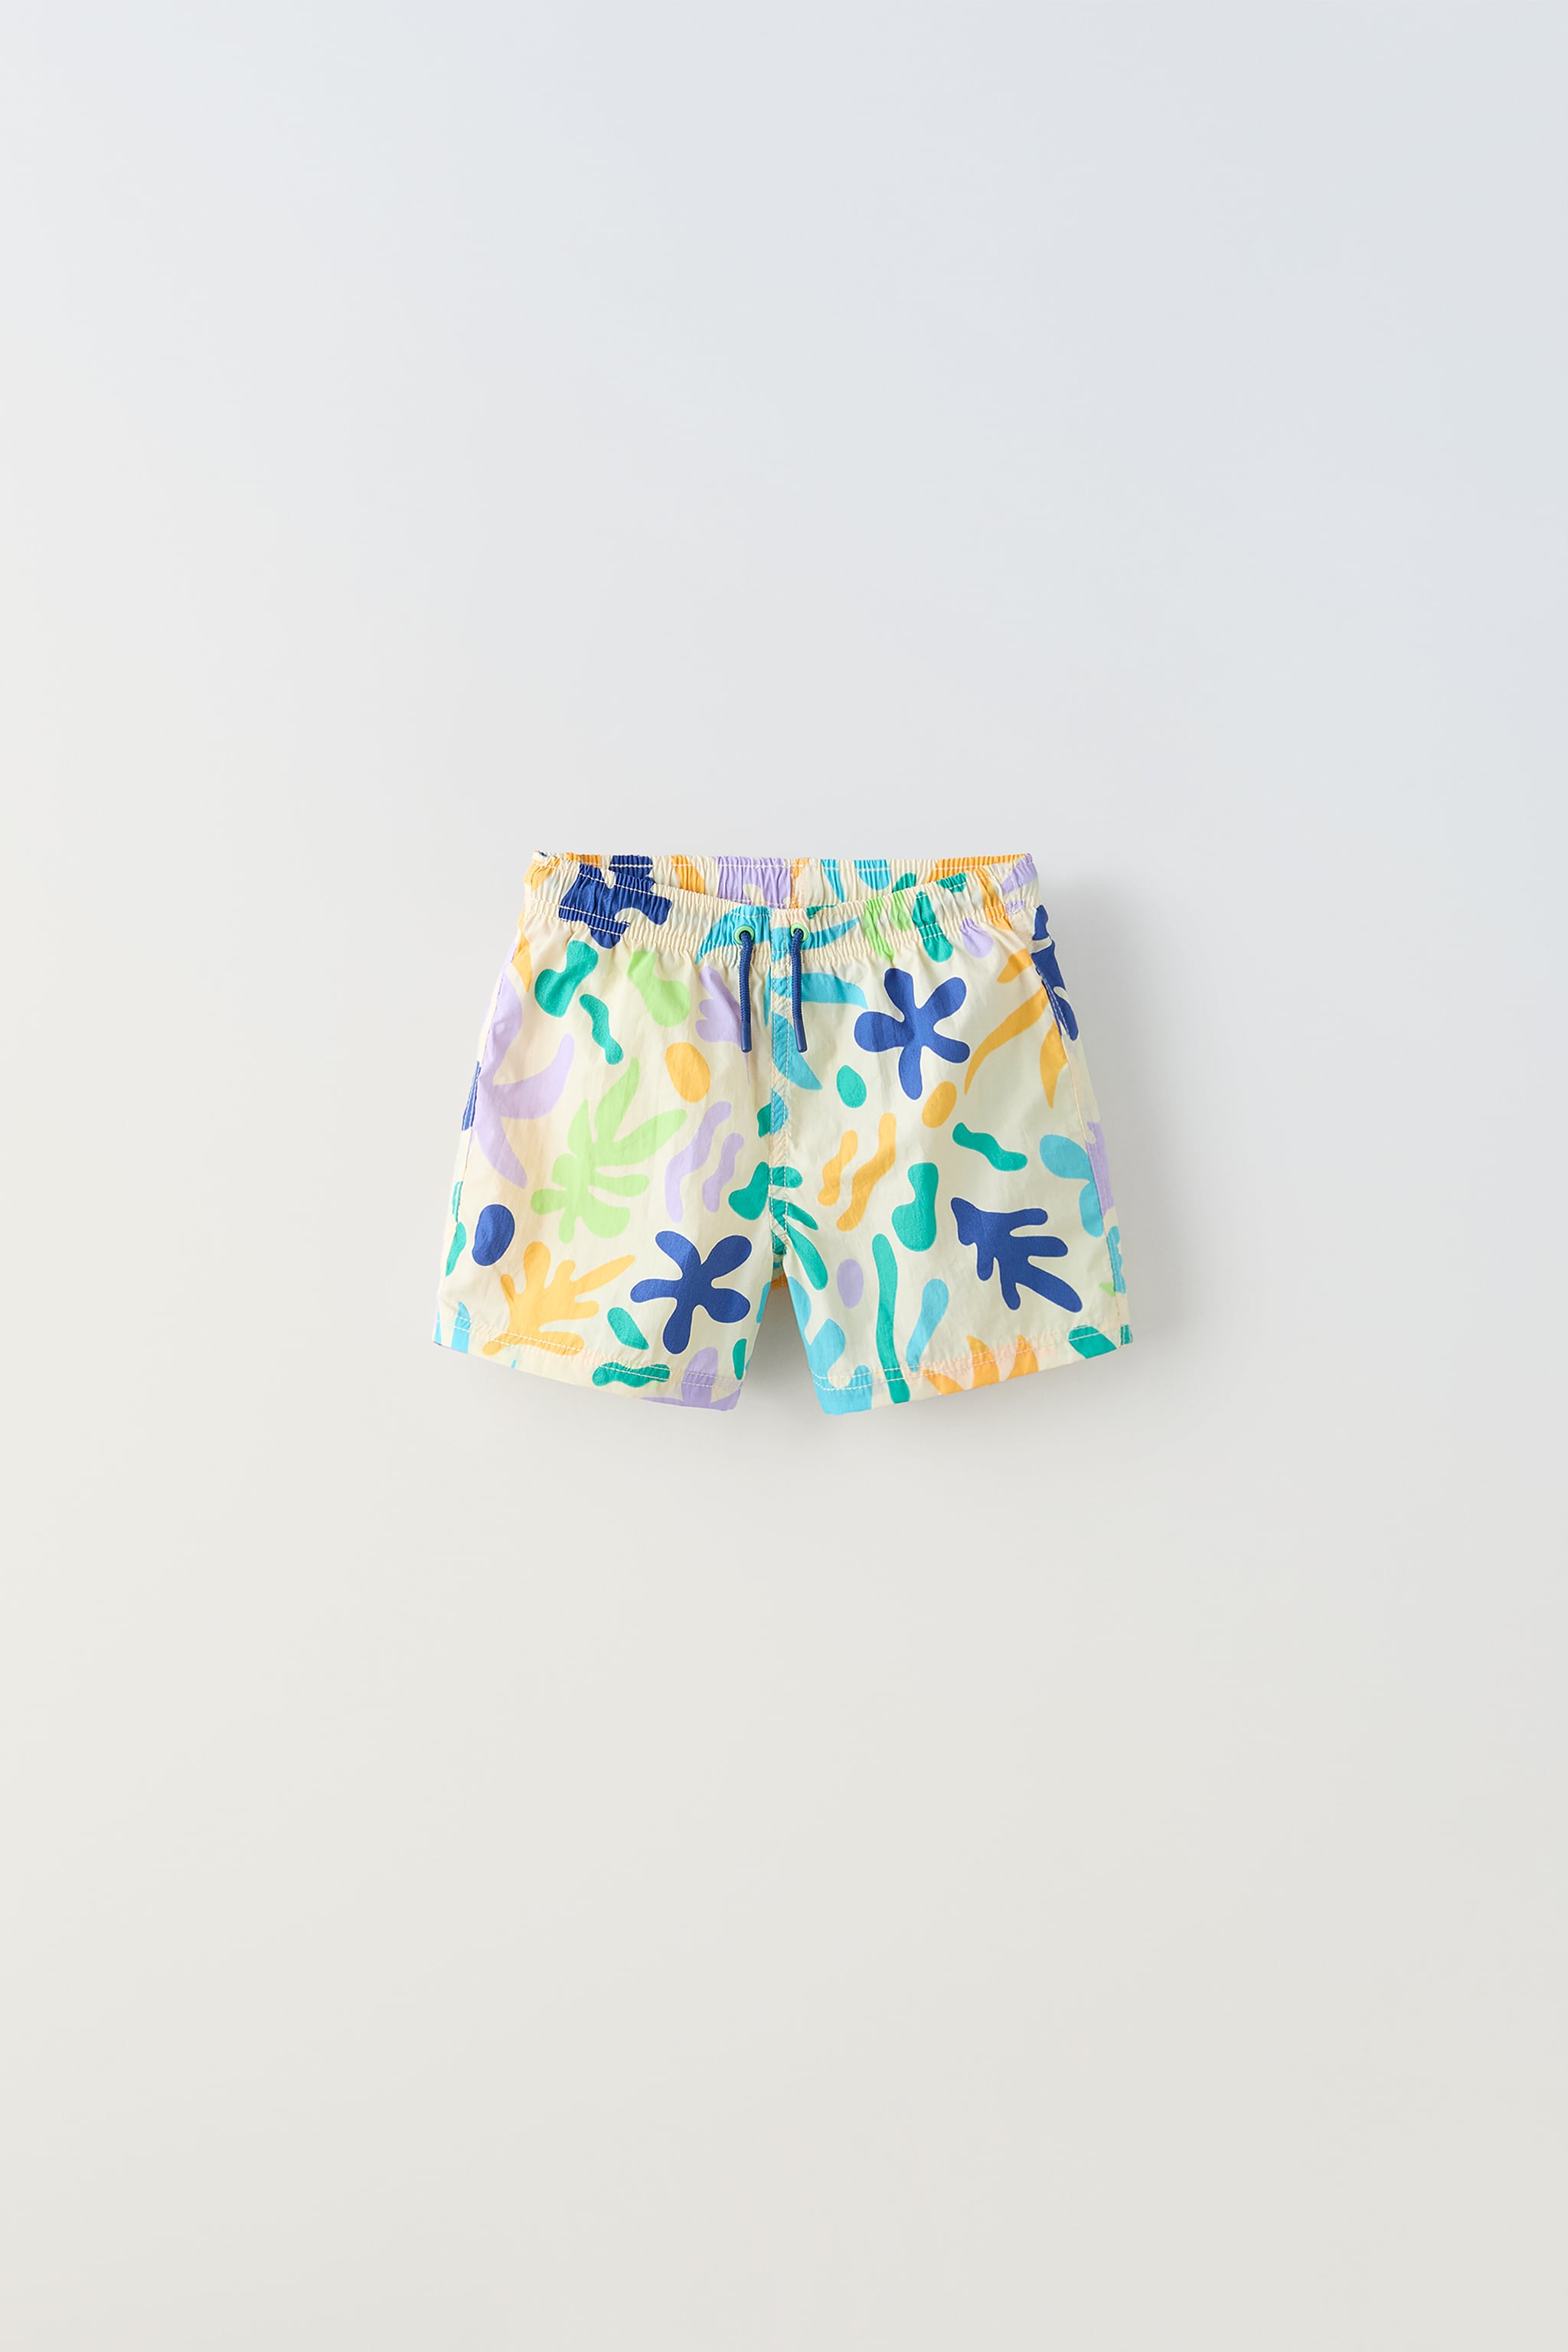 6-14 YEARS/ SUN AND LEAVES PRINT SWIMSUIT